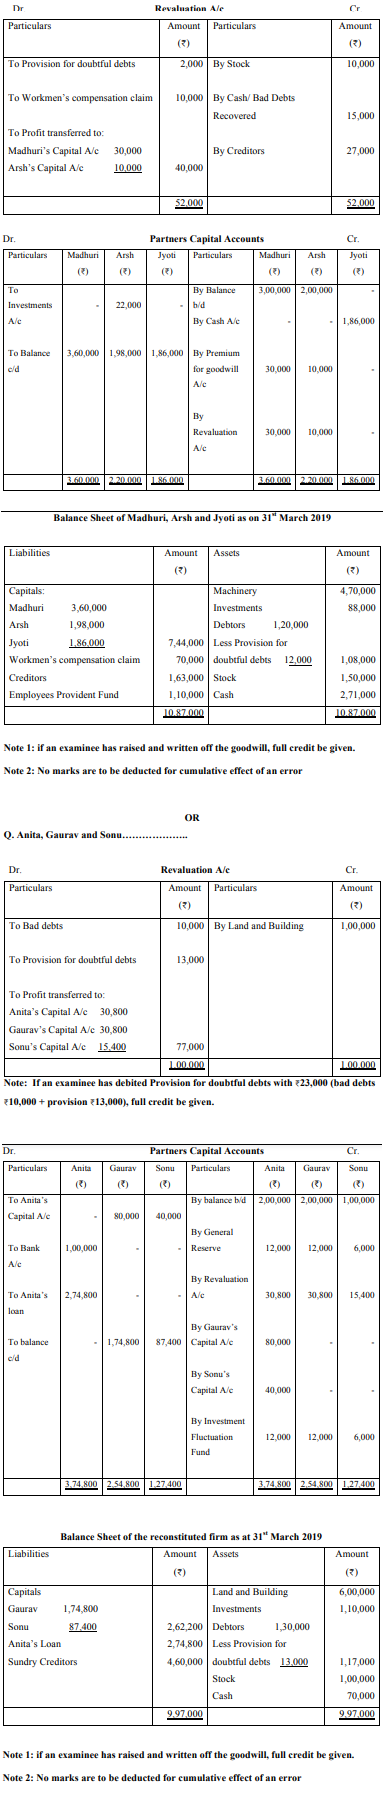 Madhuri and Arsh were partners in a firm sharing profits and losses in 